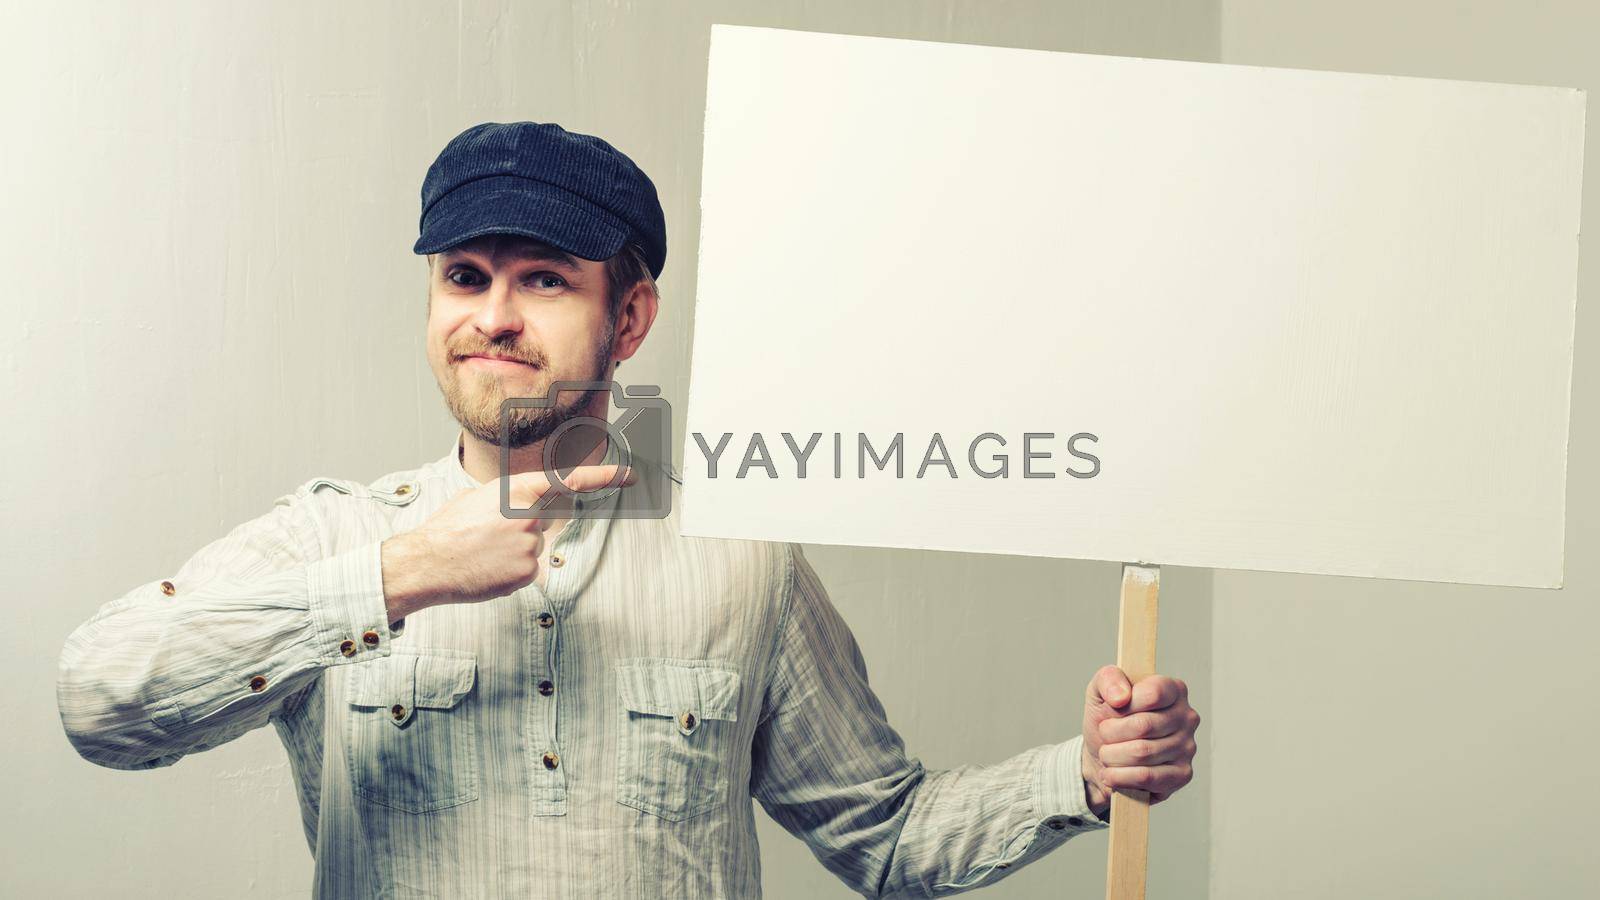 Royalty free image of Angry protesting worker with blank protest sign by zartarn